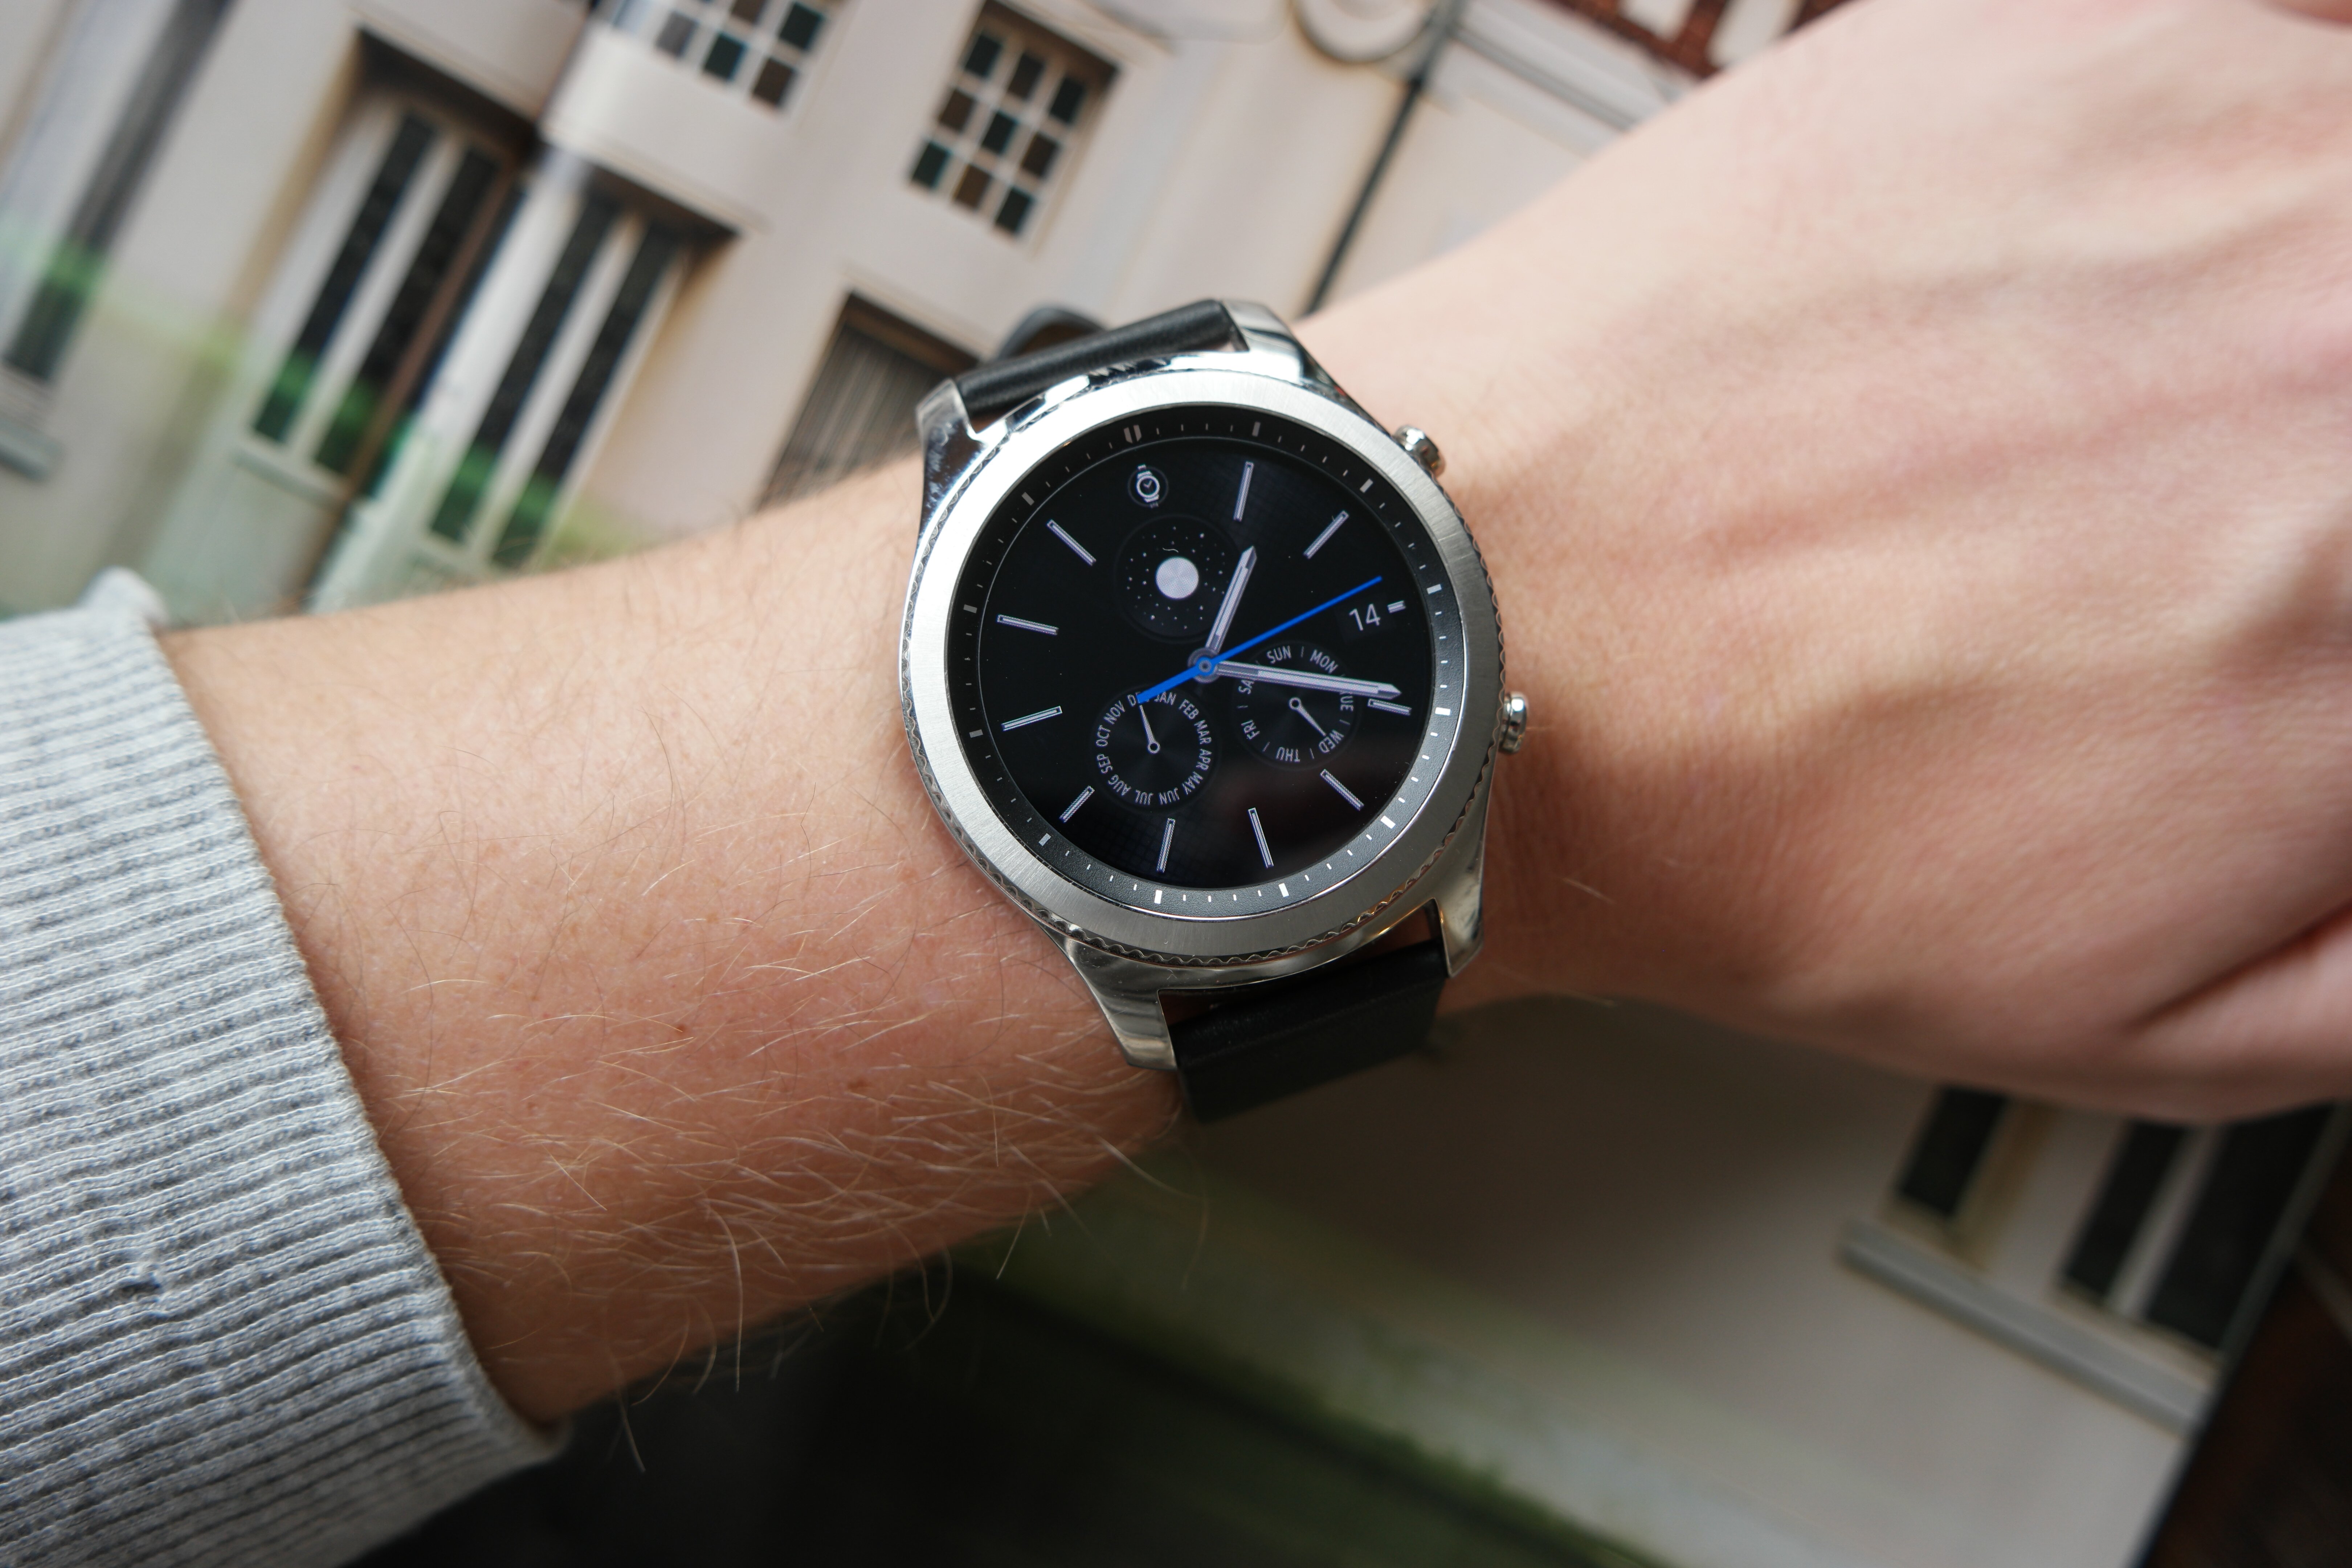 Samsung Gear S3 classic review: The smartwatch we've all been